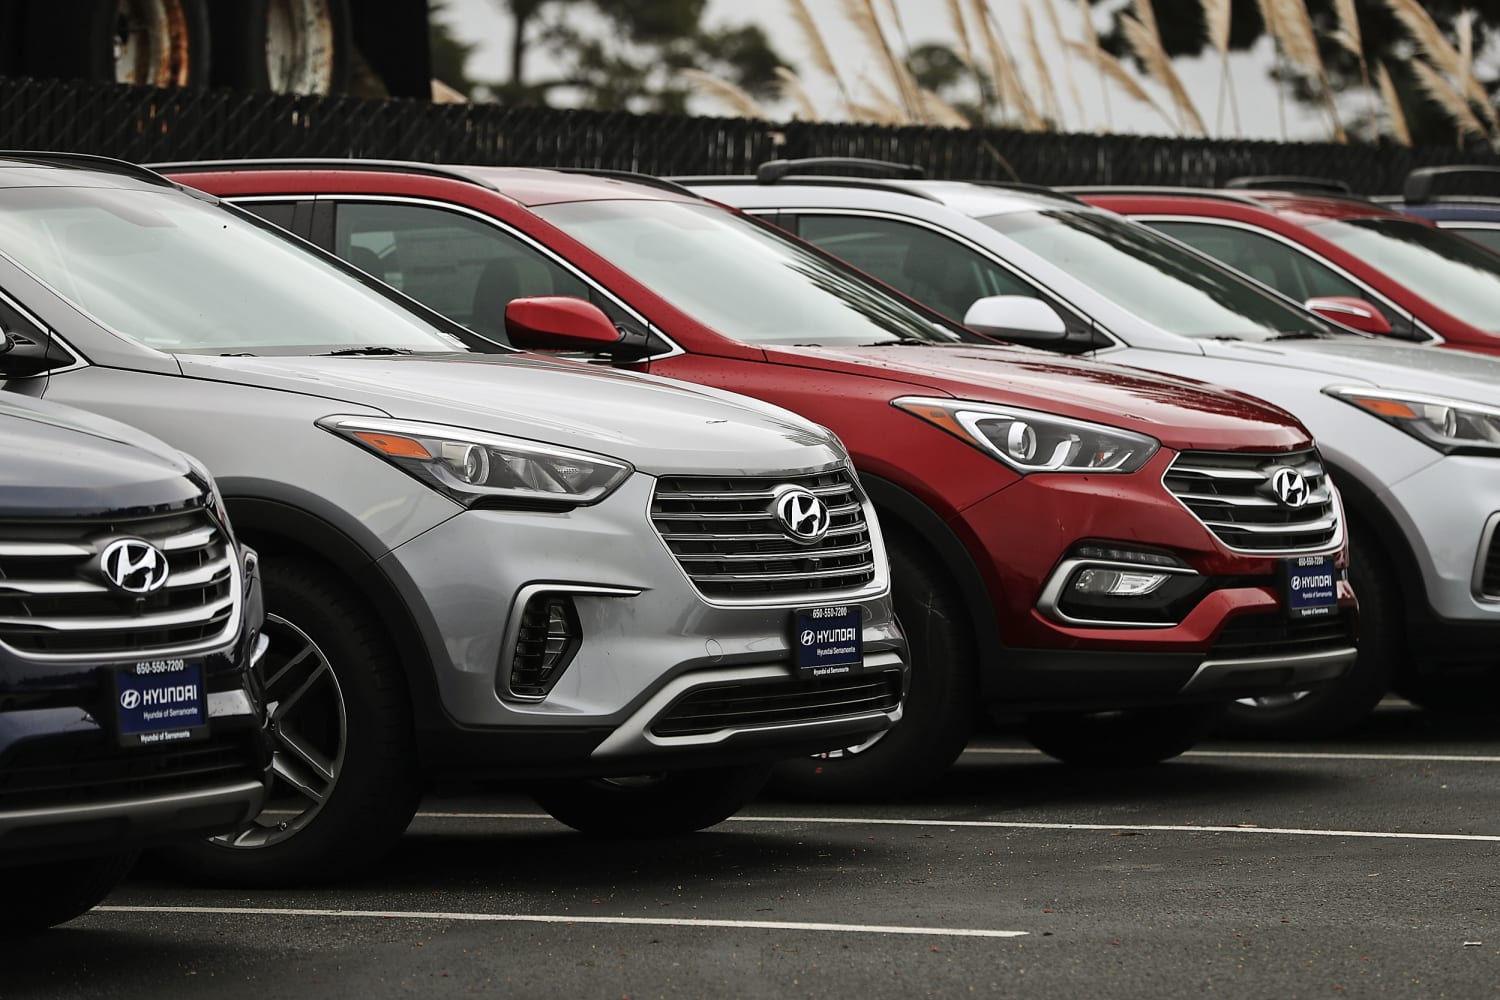 Hyundai, Kia agree to $200 million settlement with customers over car thefts